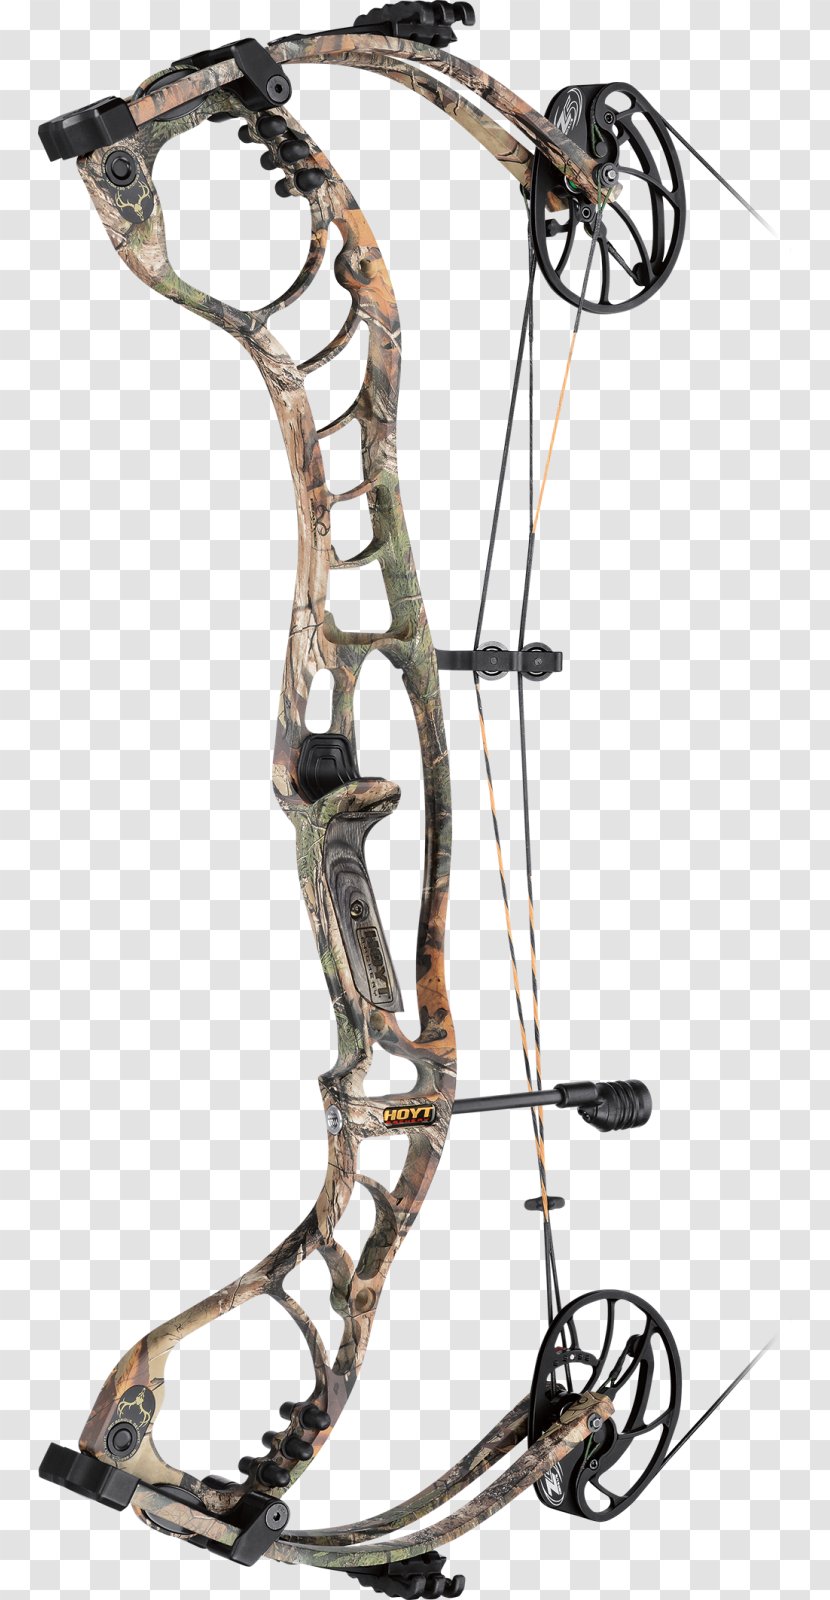 Compound Bows Bow And Arrow Bowhunting Archery - Pse - Tree Transparent PNG